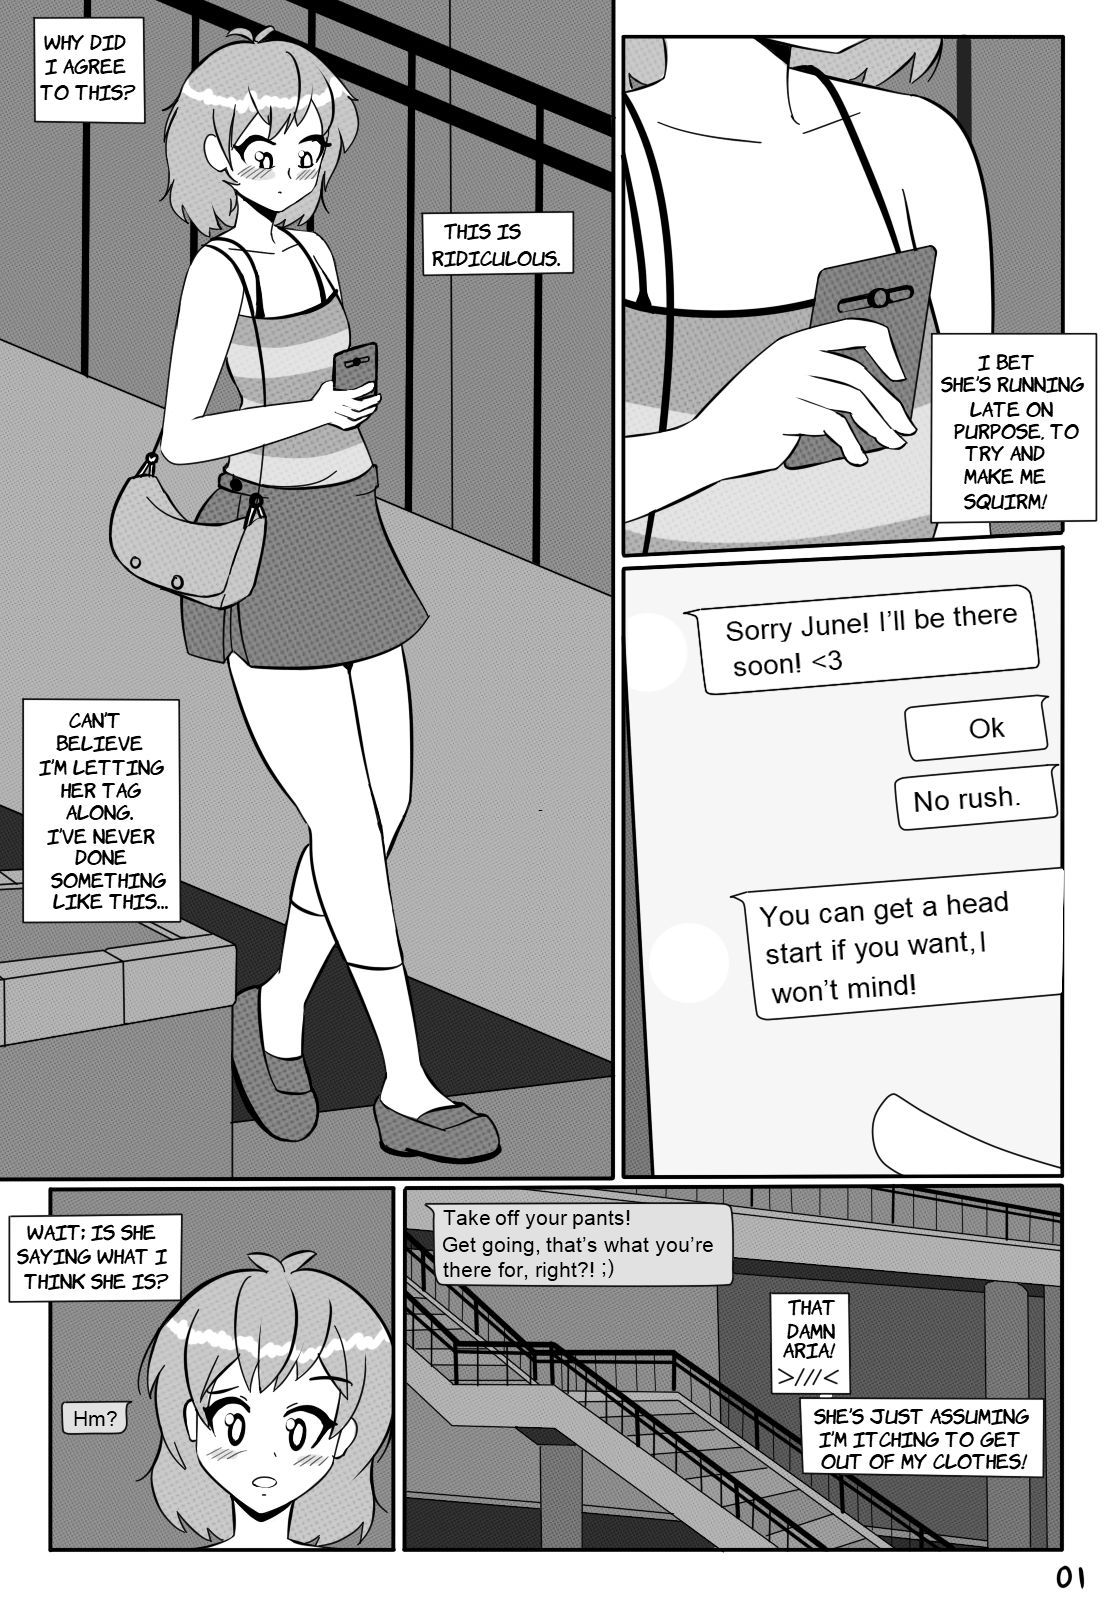 [Anewenfartist] First Date (On Going) 1